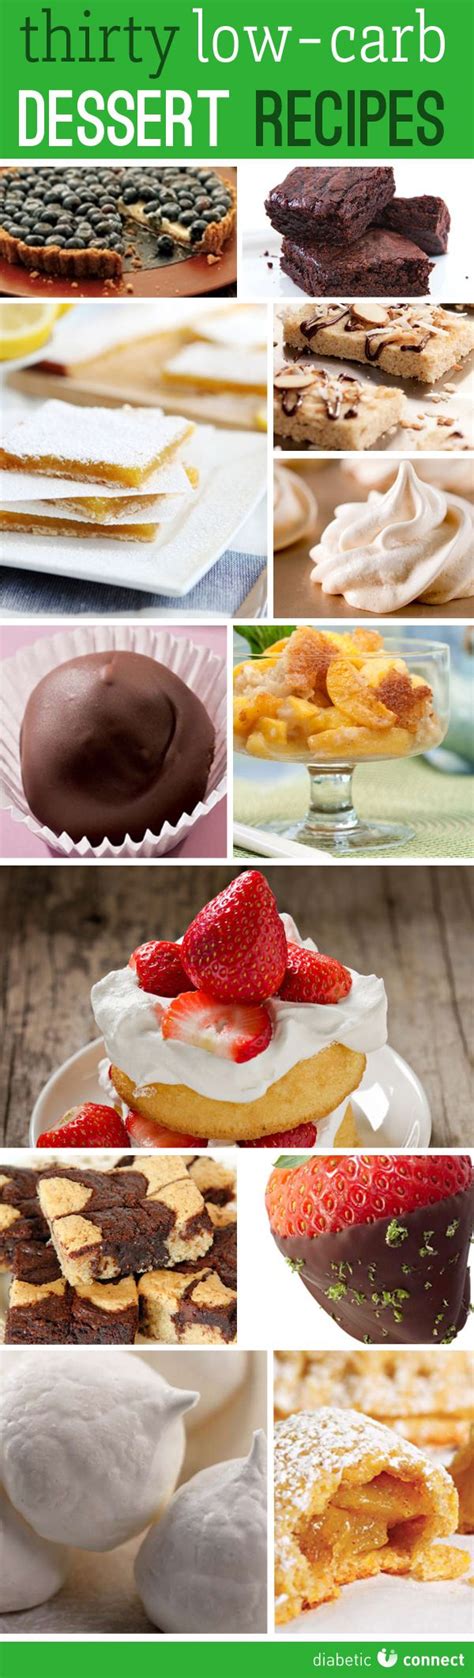 So now i've hyped it so much, it's time to get in the kitchen and start making my luscious italian dessert, so you too can boast! Most Popular Low Carb Desserts - Page 4 - Weight Loss ...